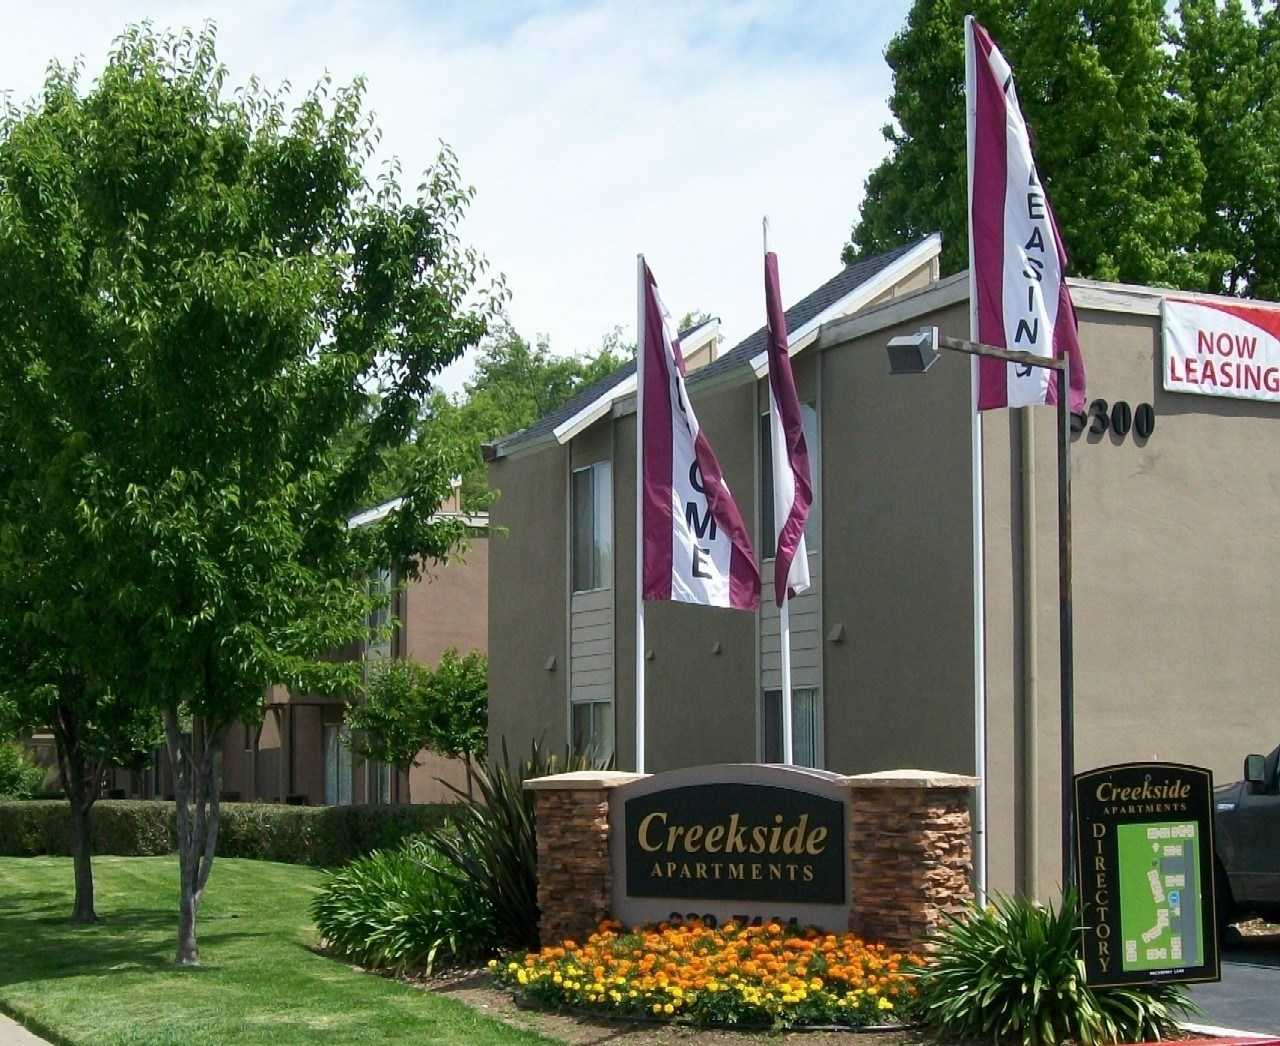 Apartments for rent at Creekside Apartments in Haggin Park